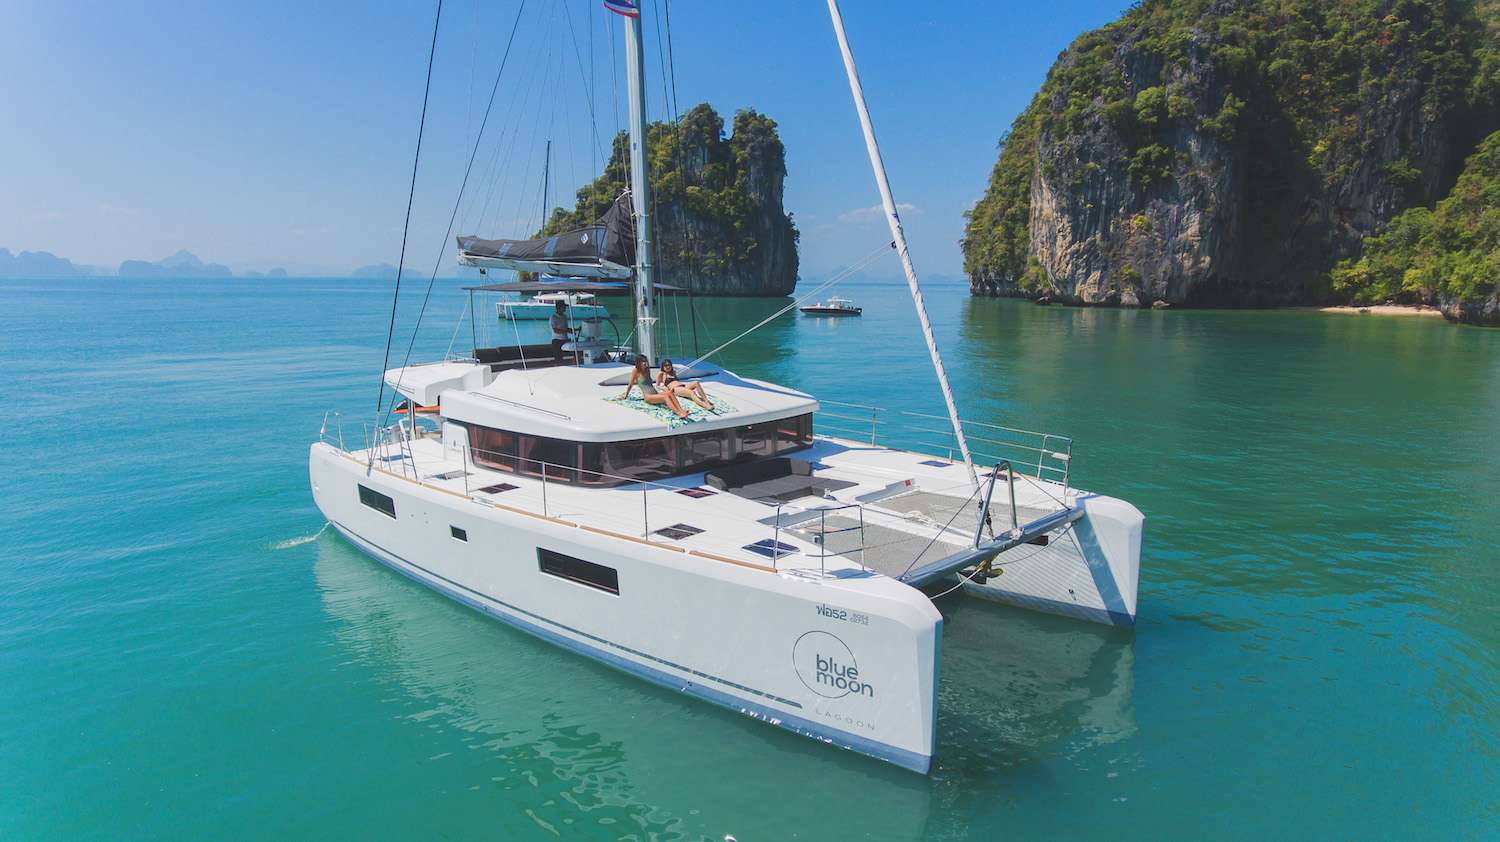 blue moon - Yacht Charter Philippines & Boat hire in Indian Ocean & SE Asia 2